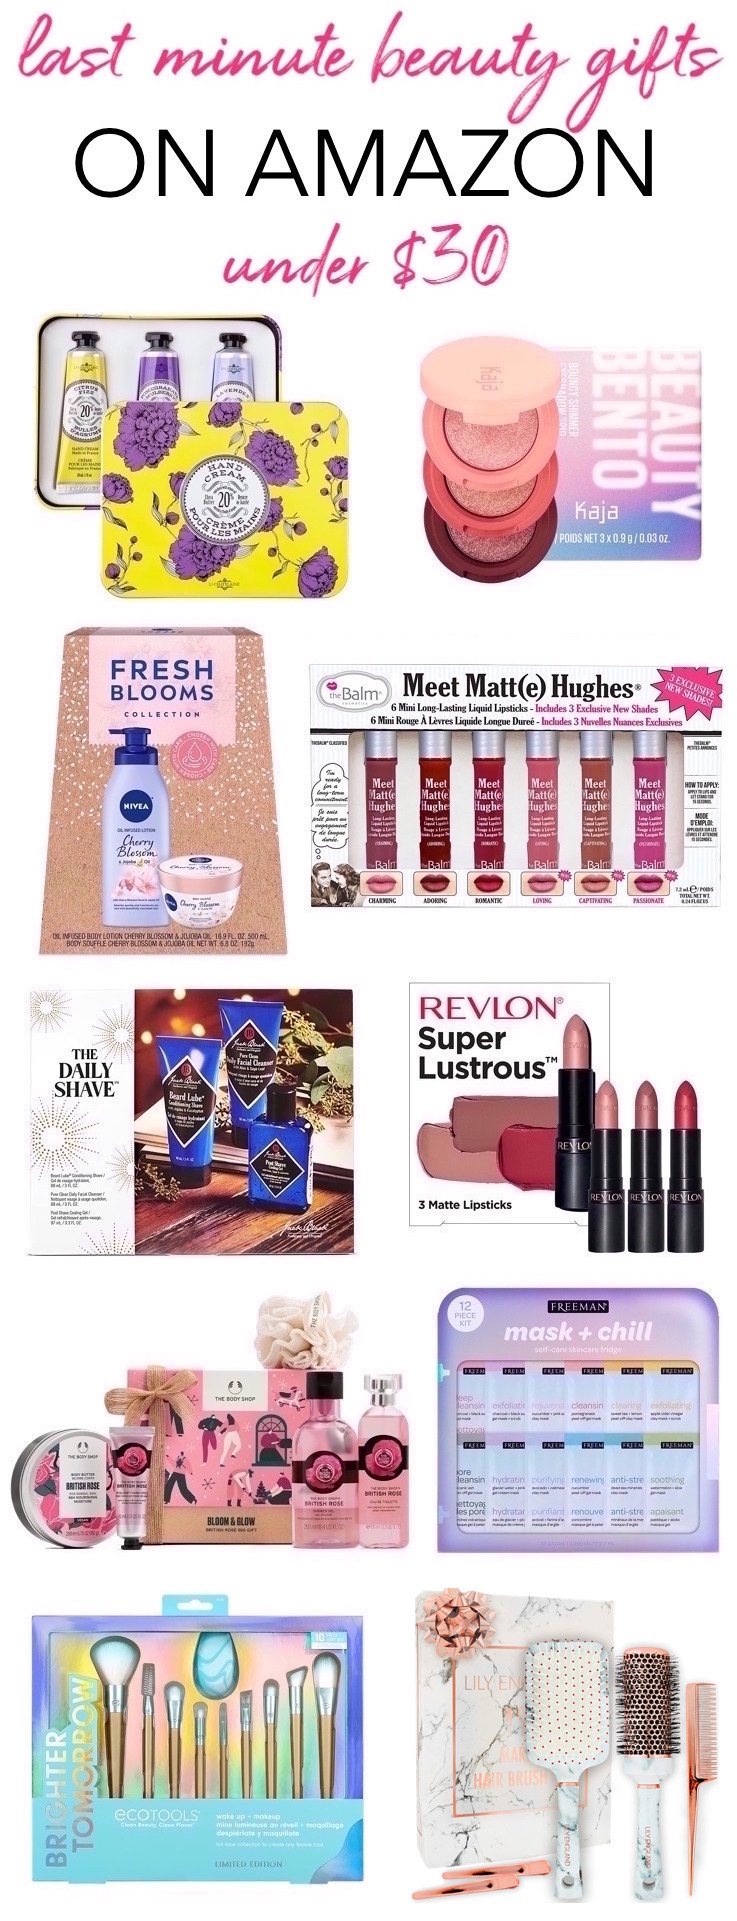 Wrap up your holiday shopping list with these last minute beauty gifts on Amazon! These gift-worthy beauty buys will arrive in time, thanks to Amazon Prime!